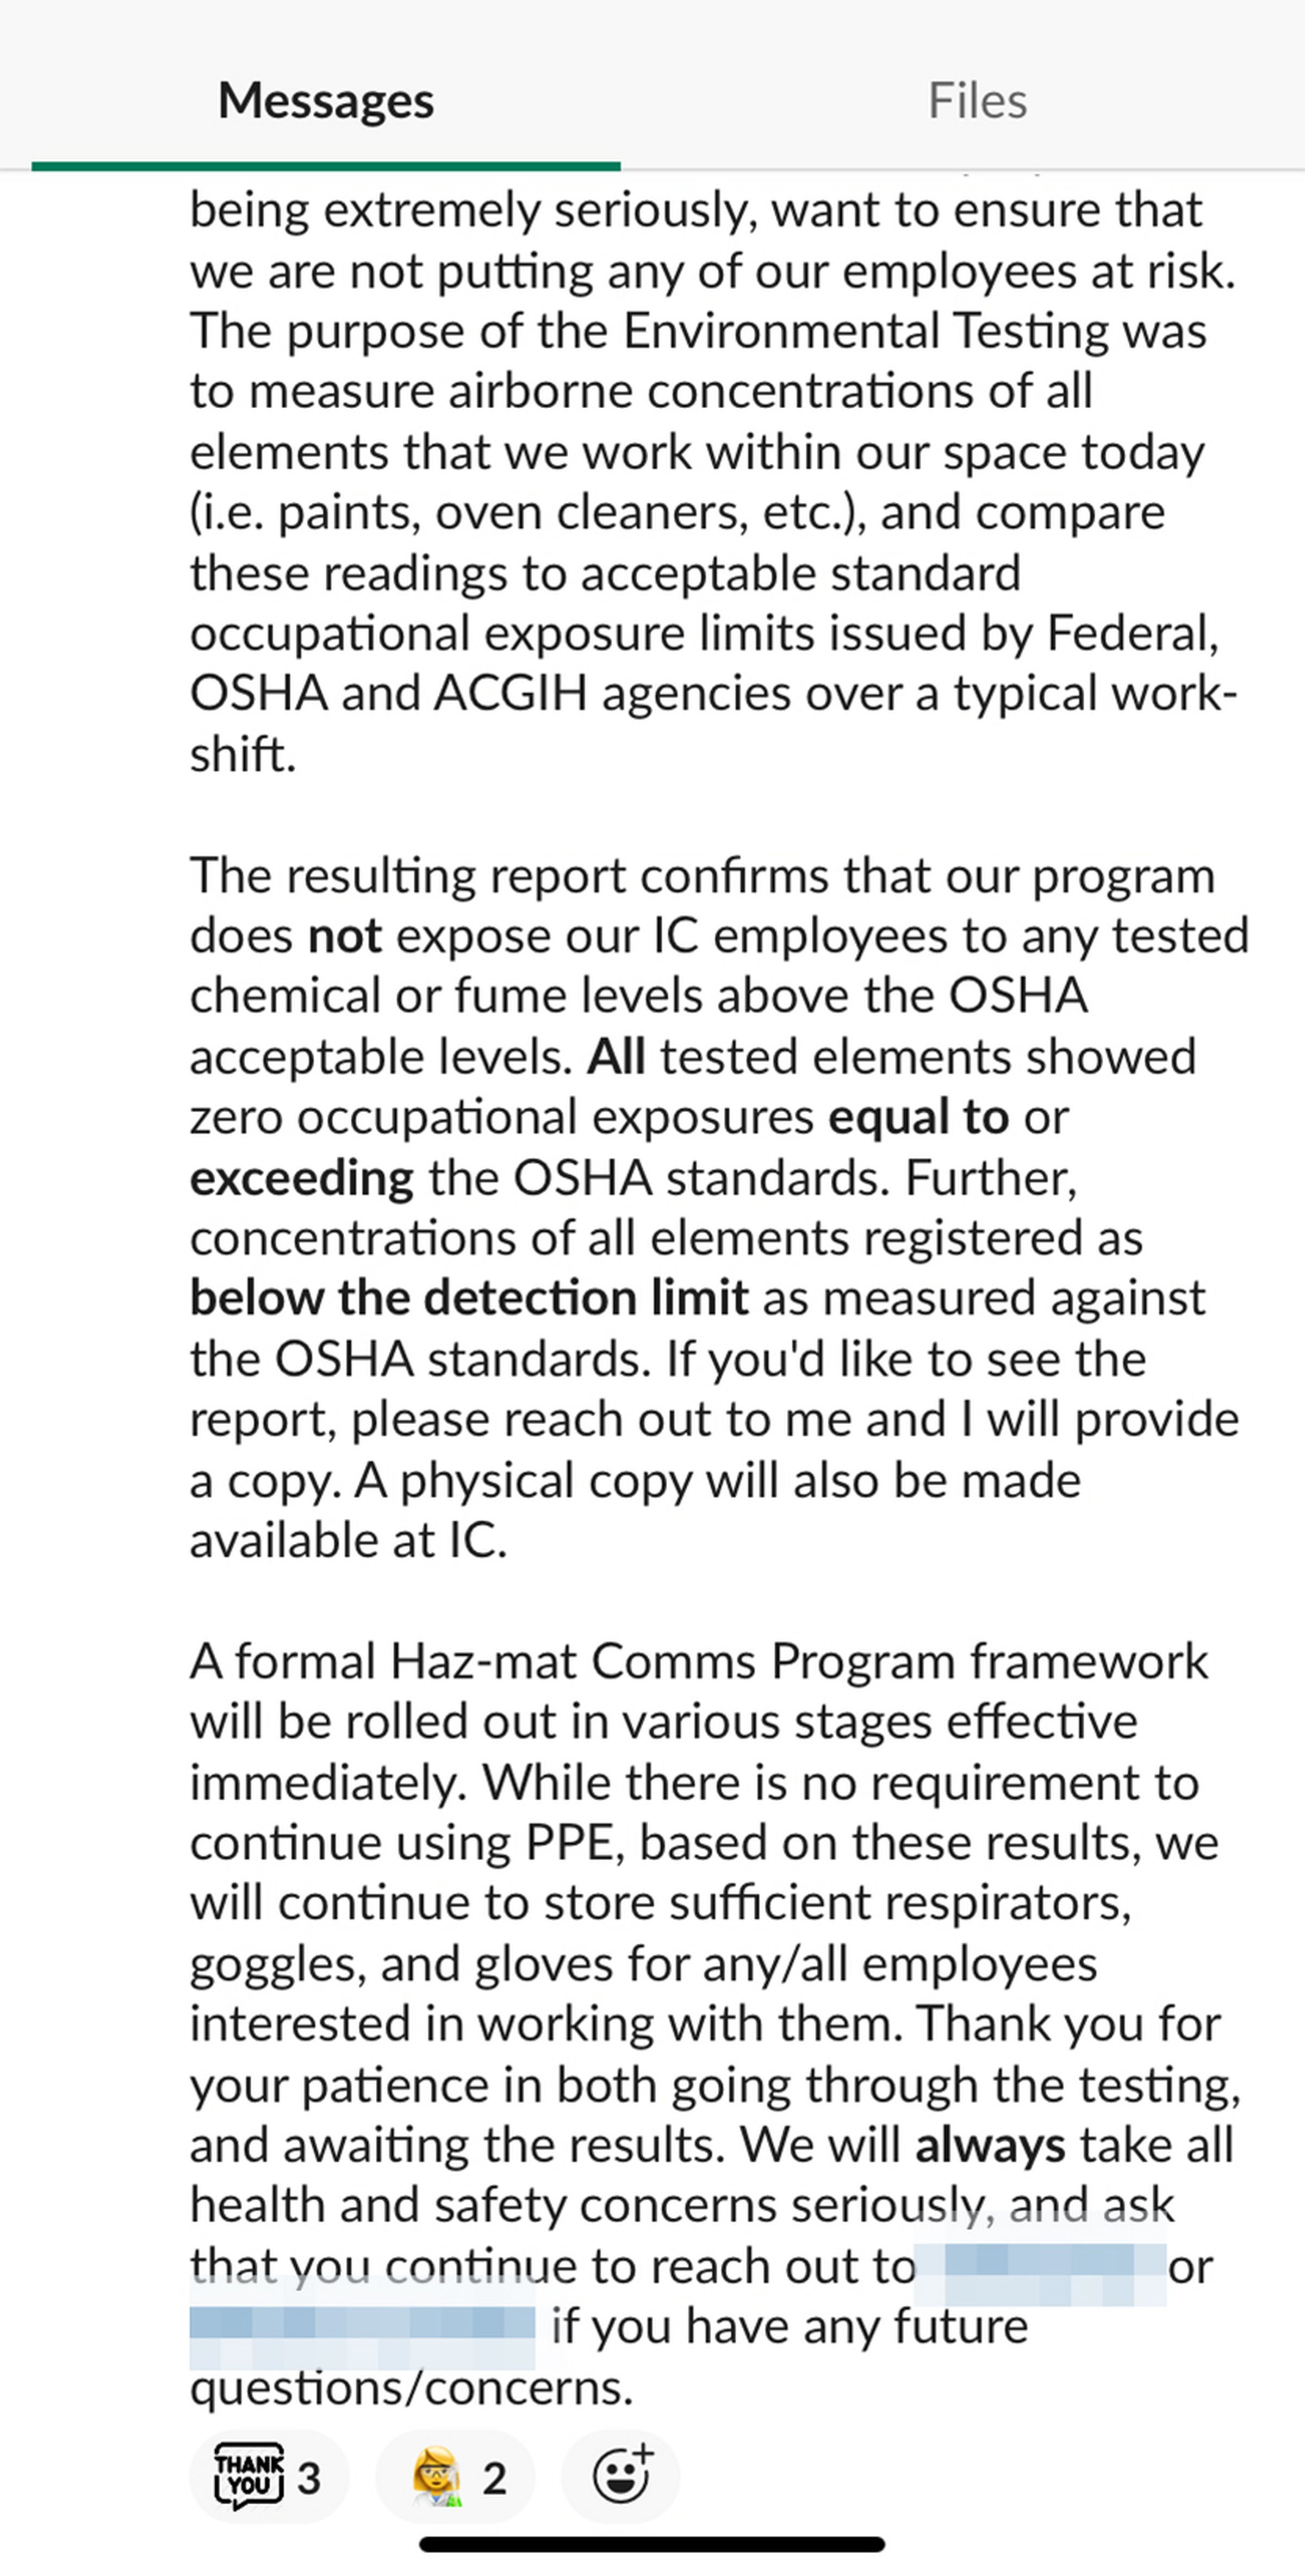 Screenshot of Away explaining to employees the OSHA inspection did not show unsafe levels of chemicals.